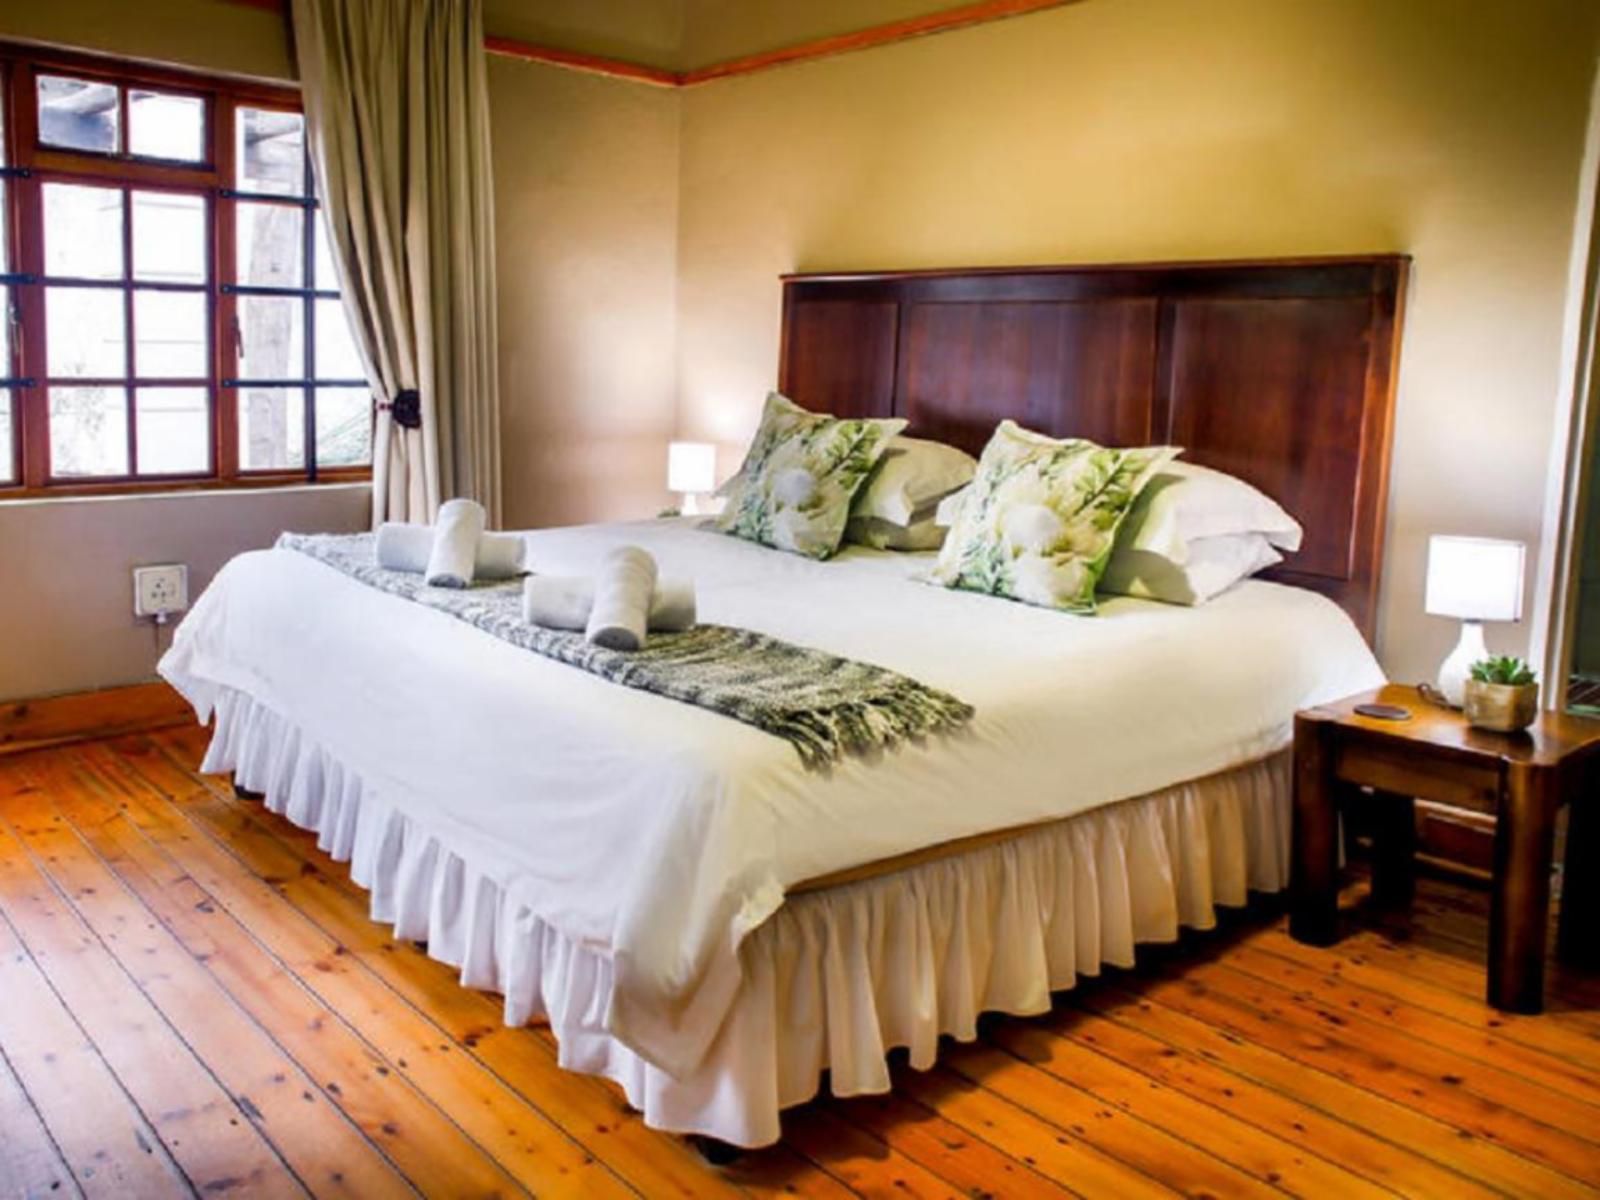 Nobis House Willows Bloemfontein Free State South Africa Bedroom